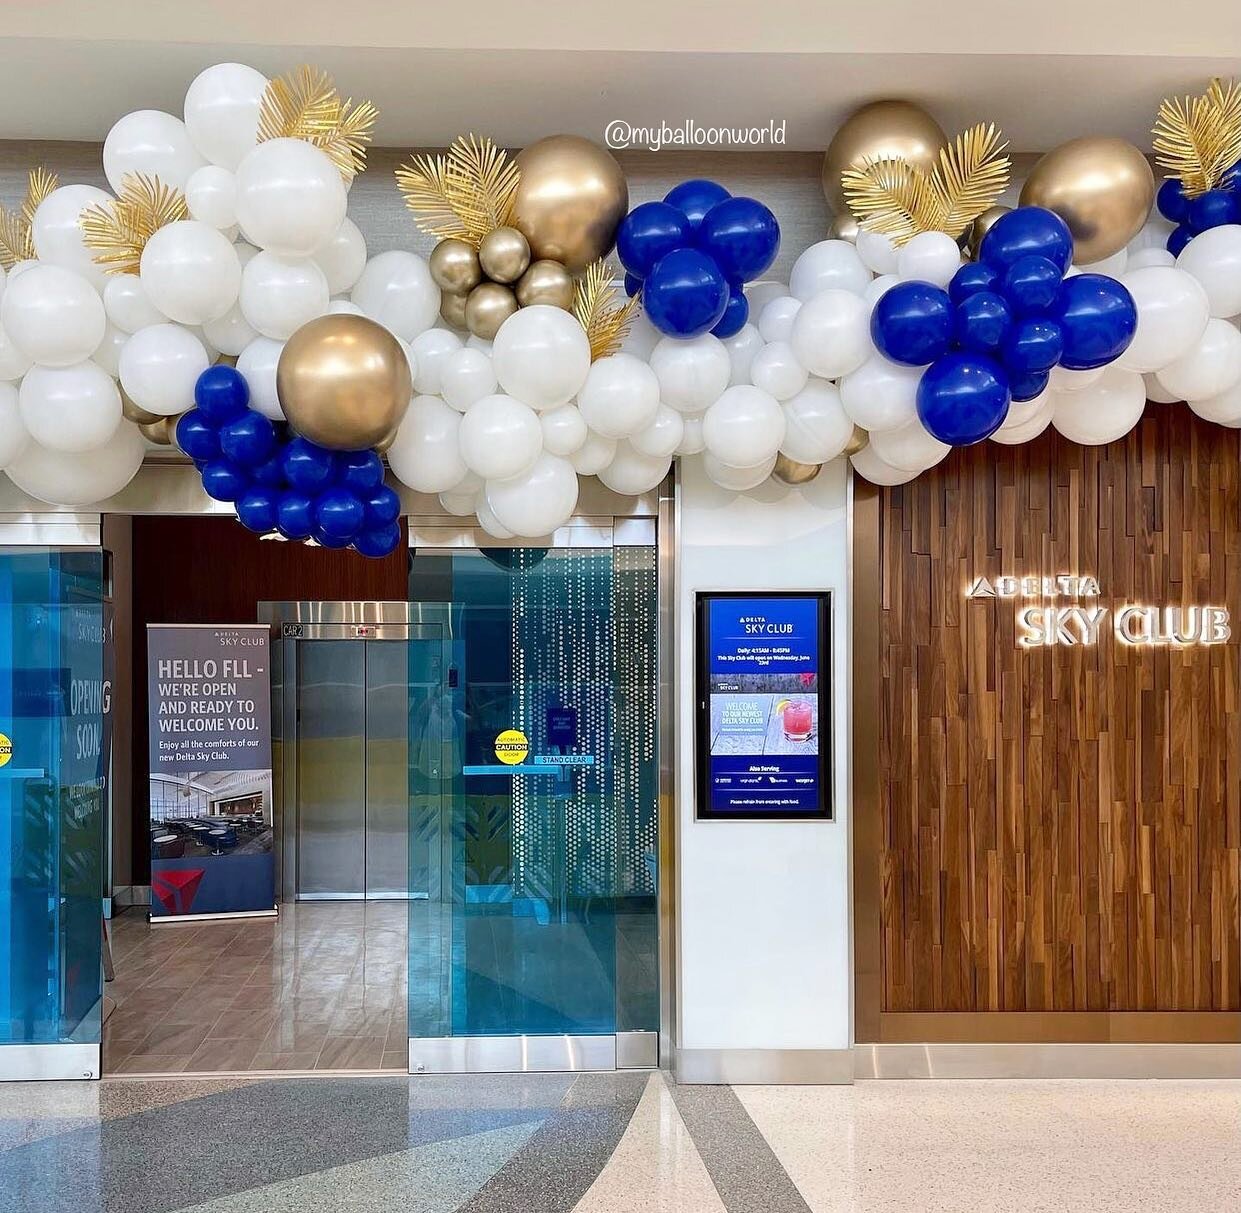 We had fun decorating for the grand opening of the new @delta skyclub at the Ft Lauderdale Airport ! Congrats!